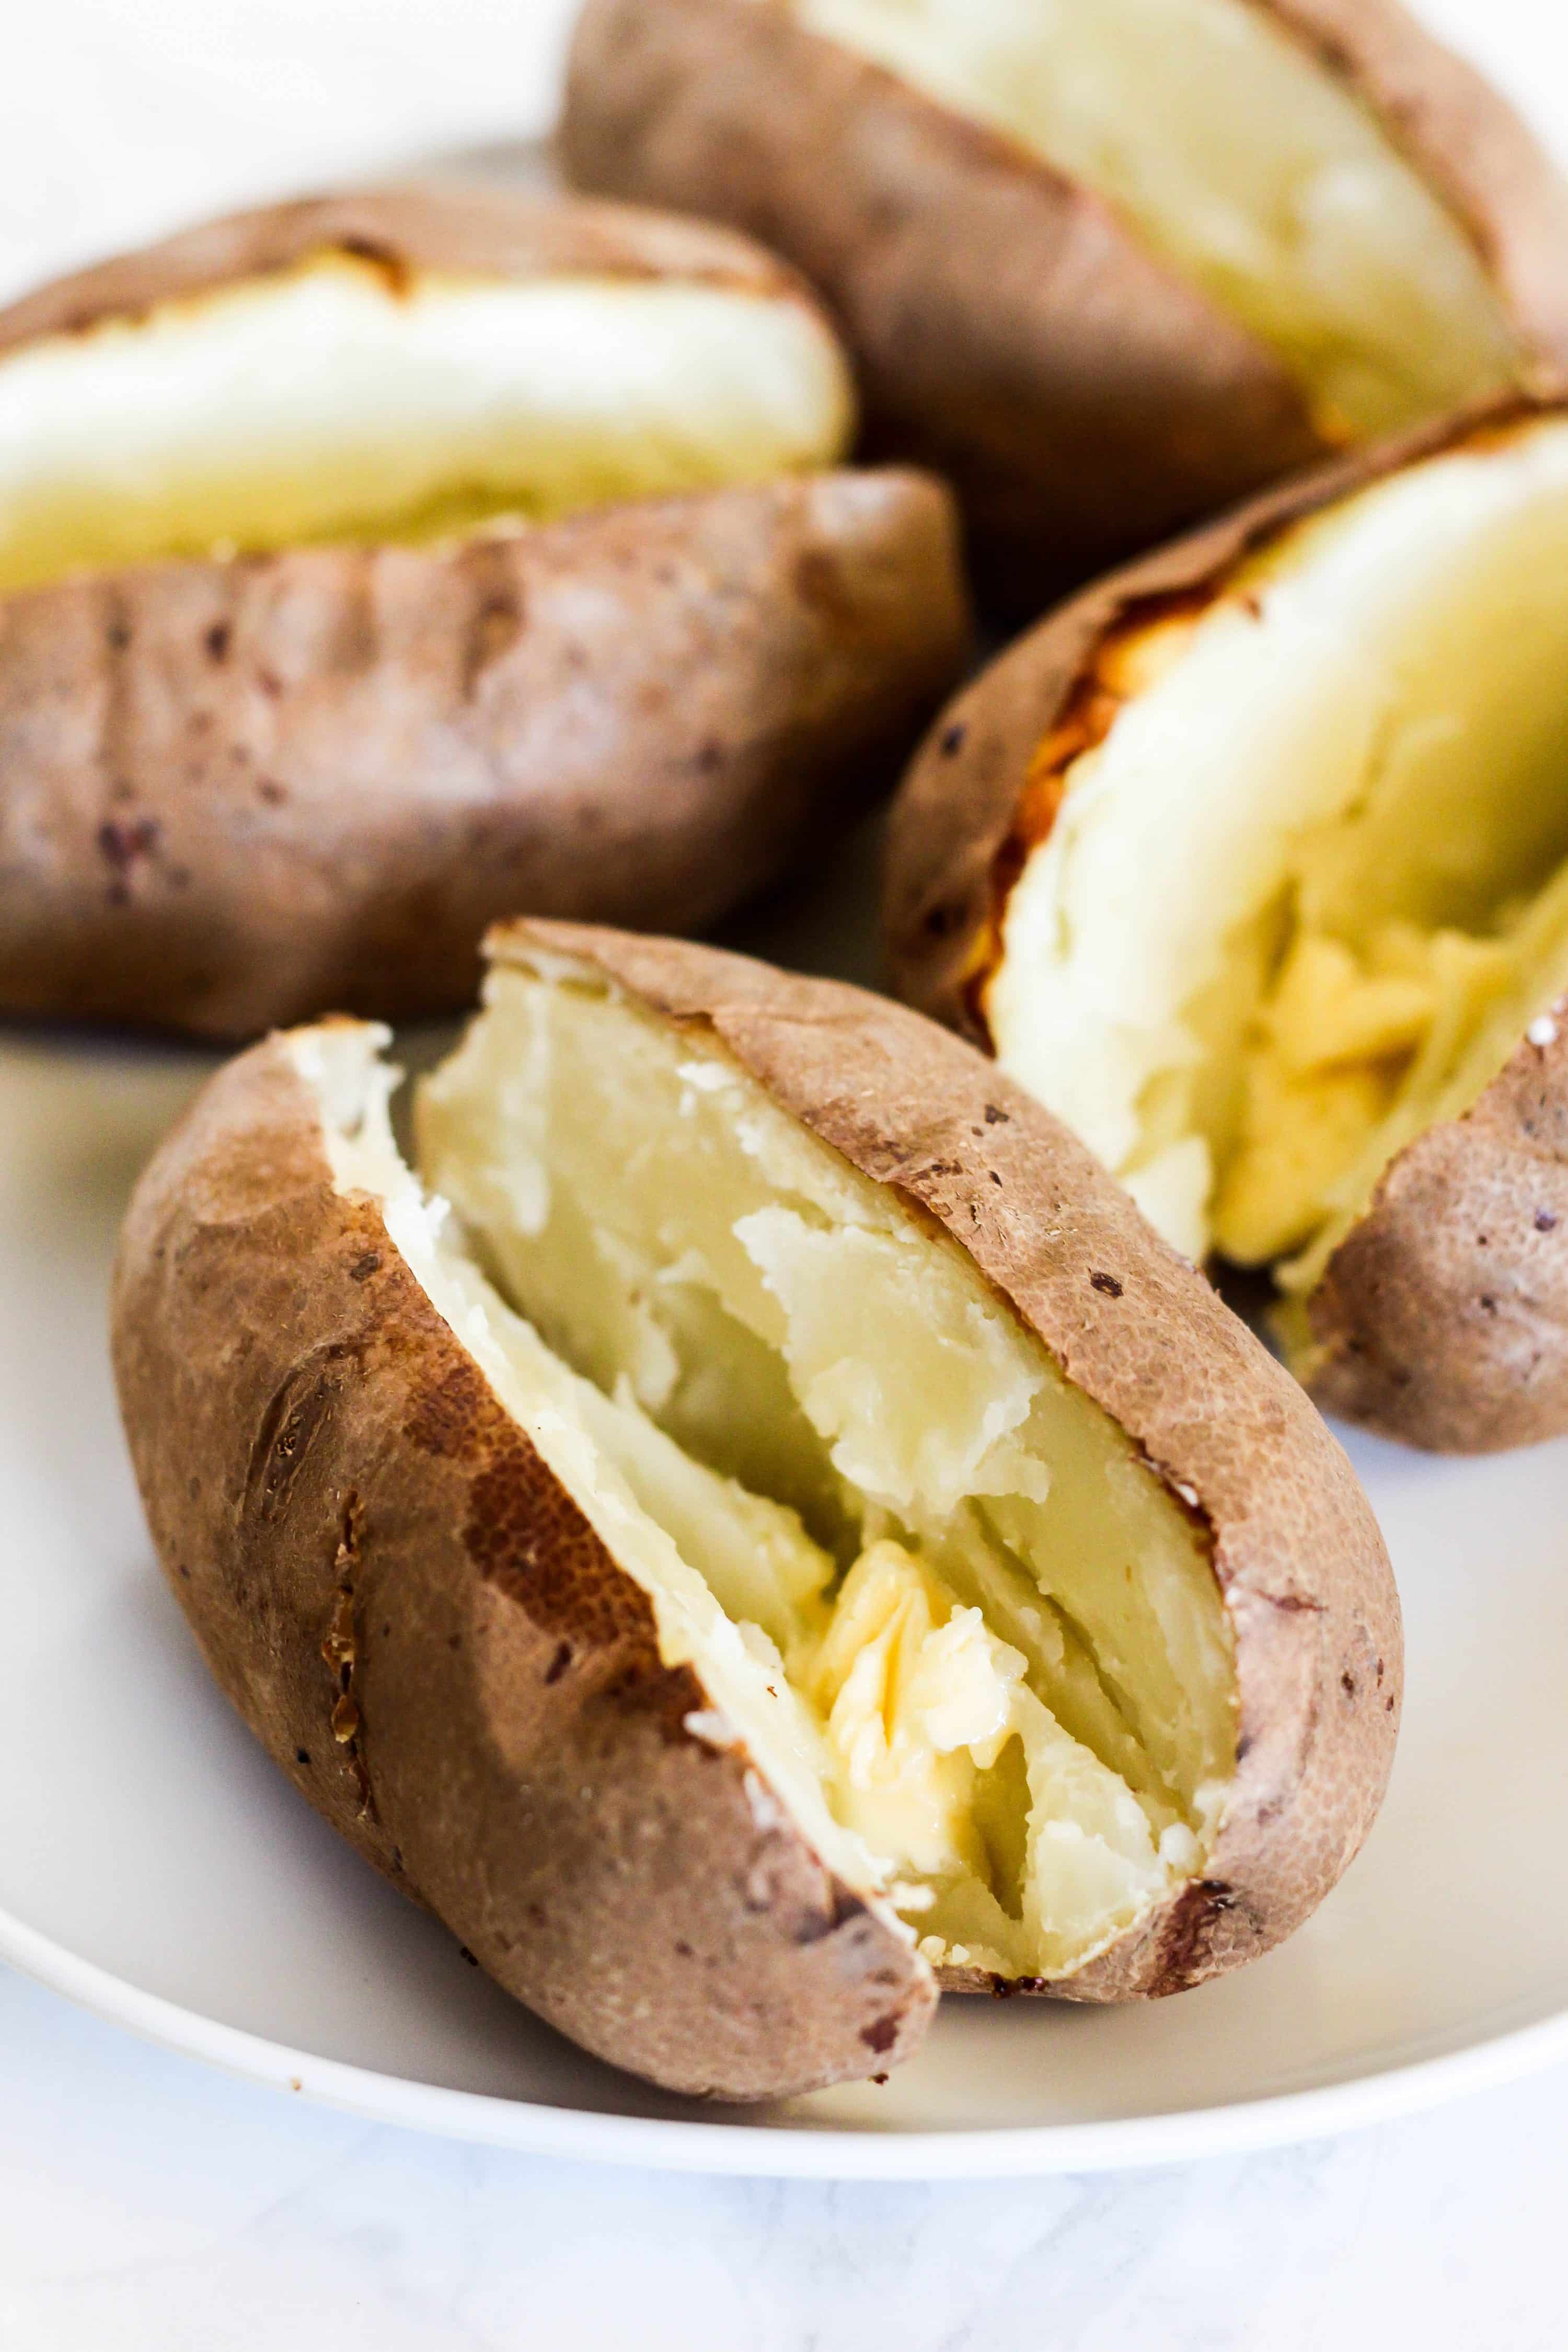 Most Popular Baking A Potato Ever – Easy Recipes To Make at Home